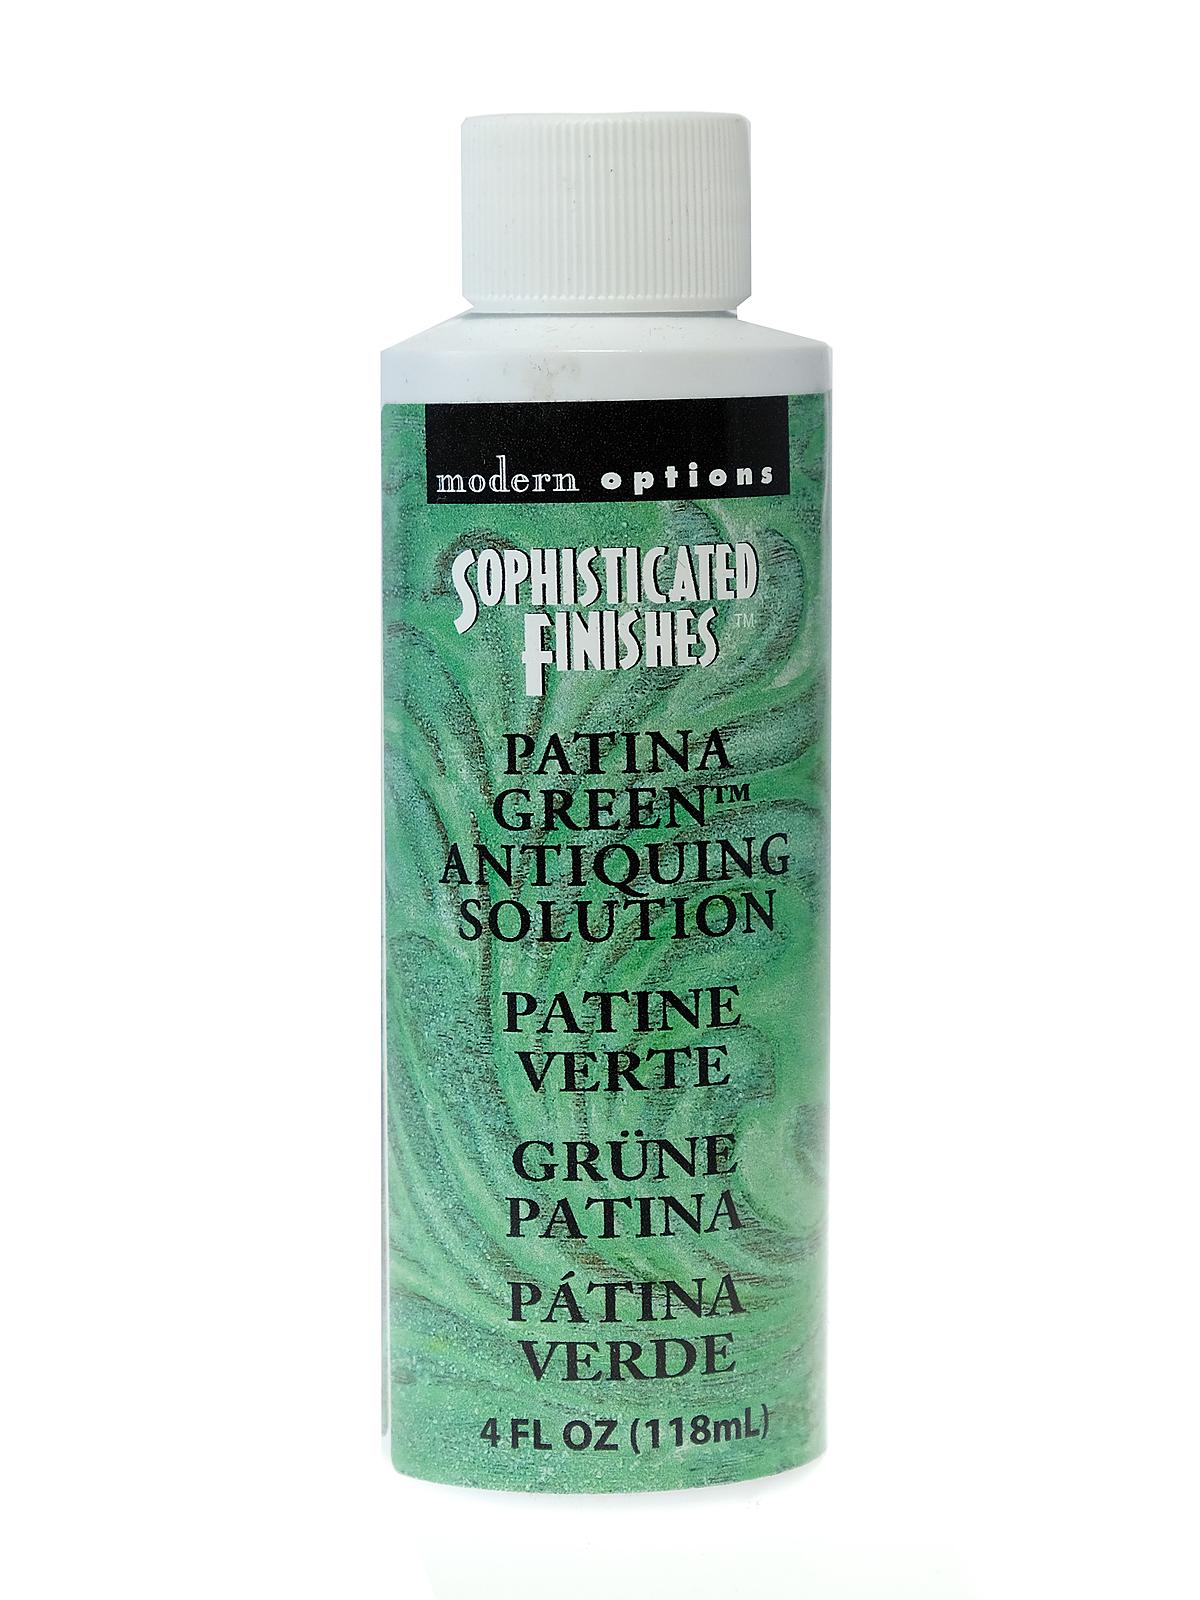 Sophisticated Finishes Patina Green Antiquing Solution 4 Oz.